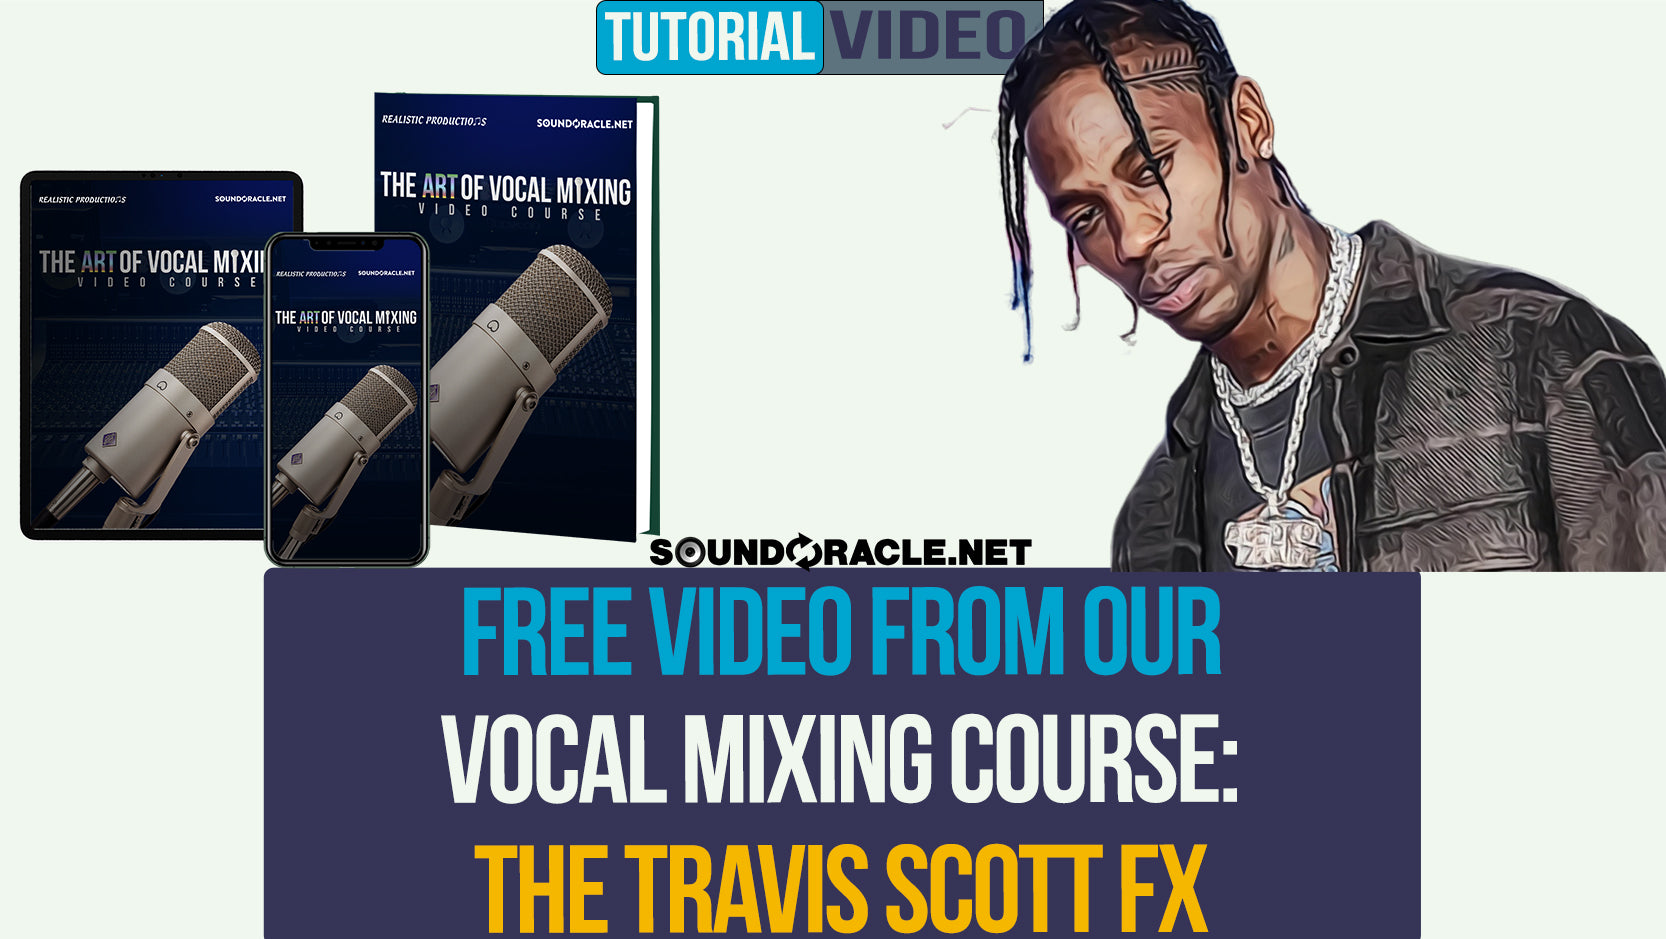 Free Video From Our Vocal Mixing Course: The Travis Scott FX